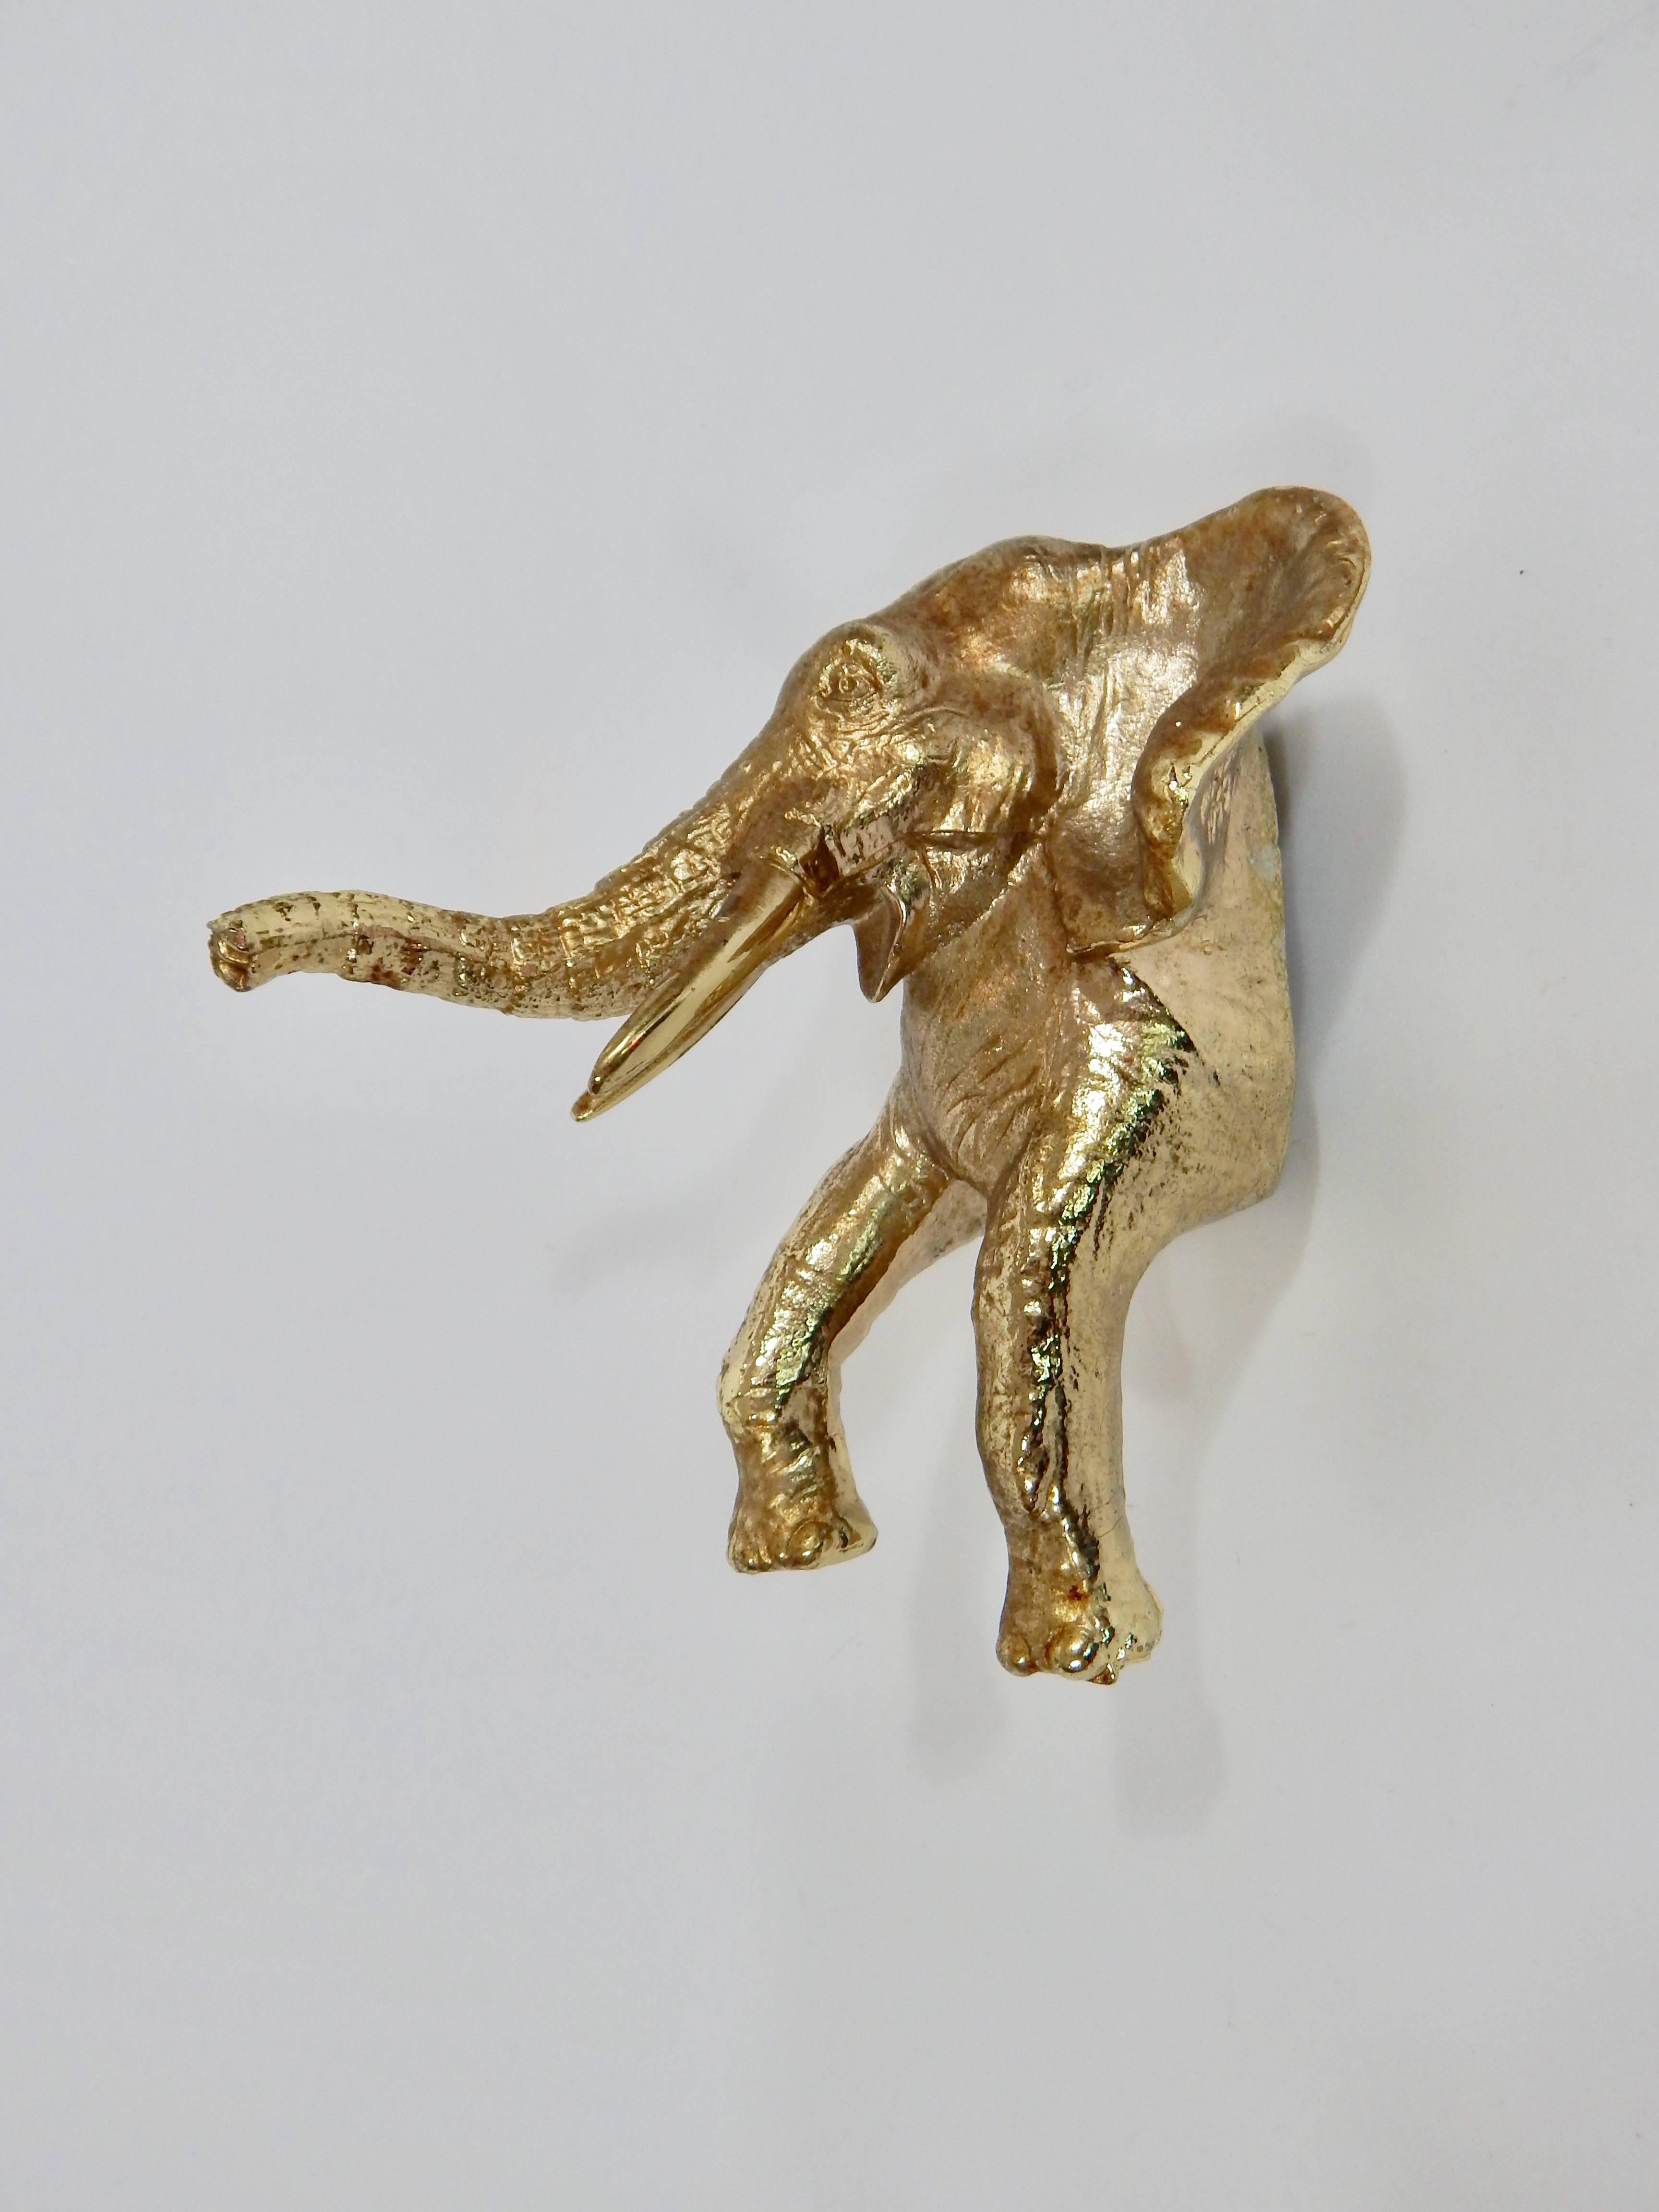 Regency 1950s Gold Gilded Cast Iron Elephant Wall Sculpture Wall Mount Handle